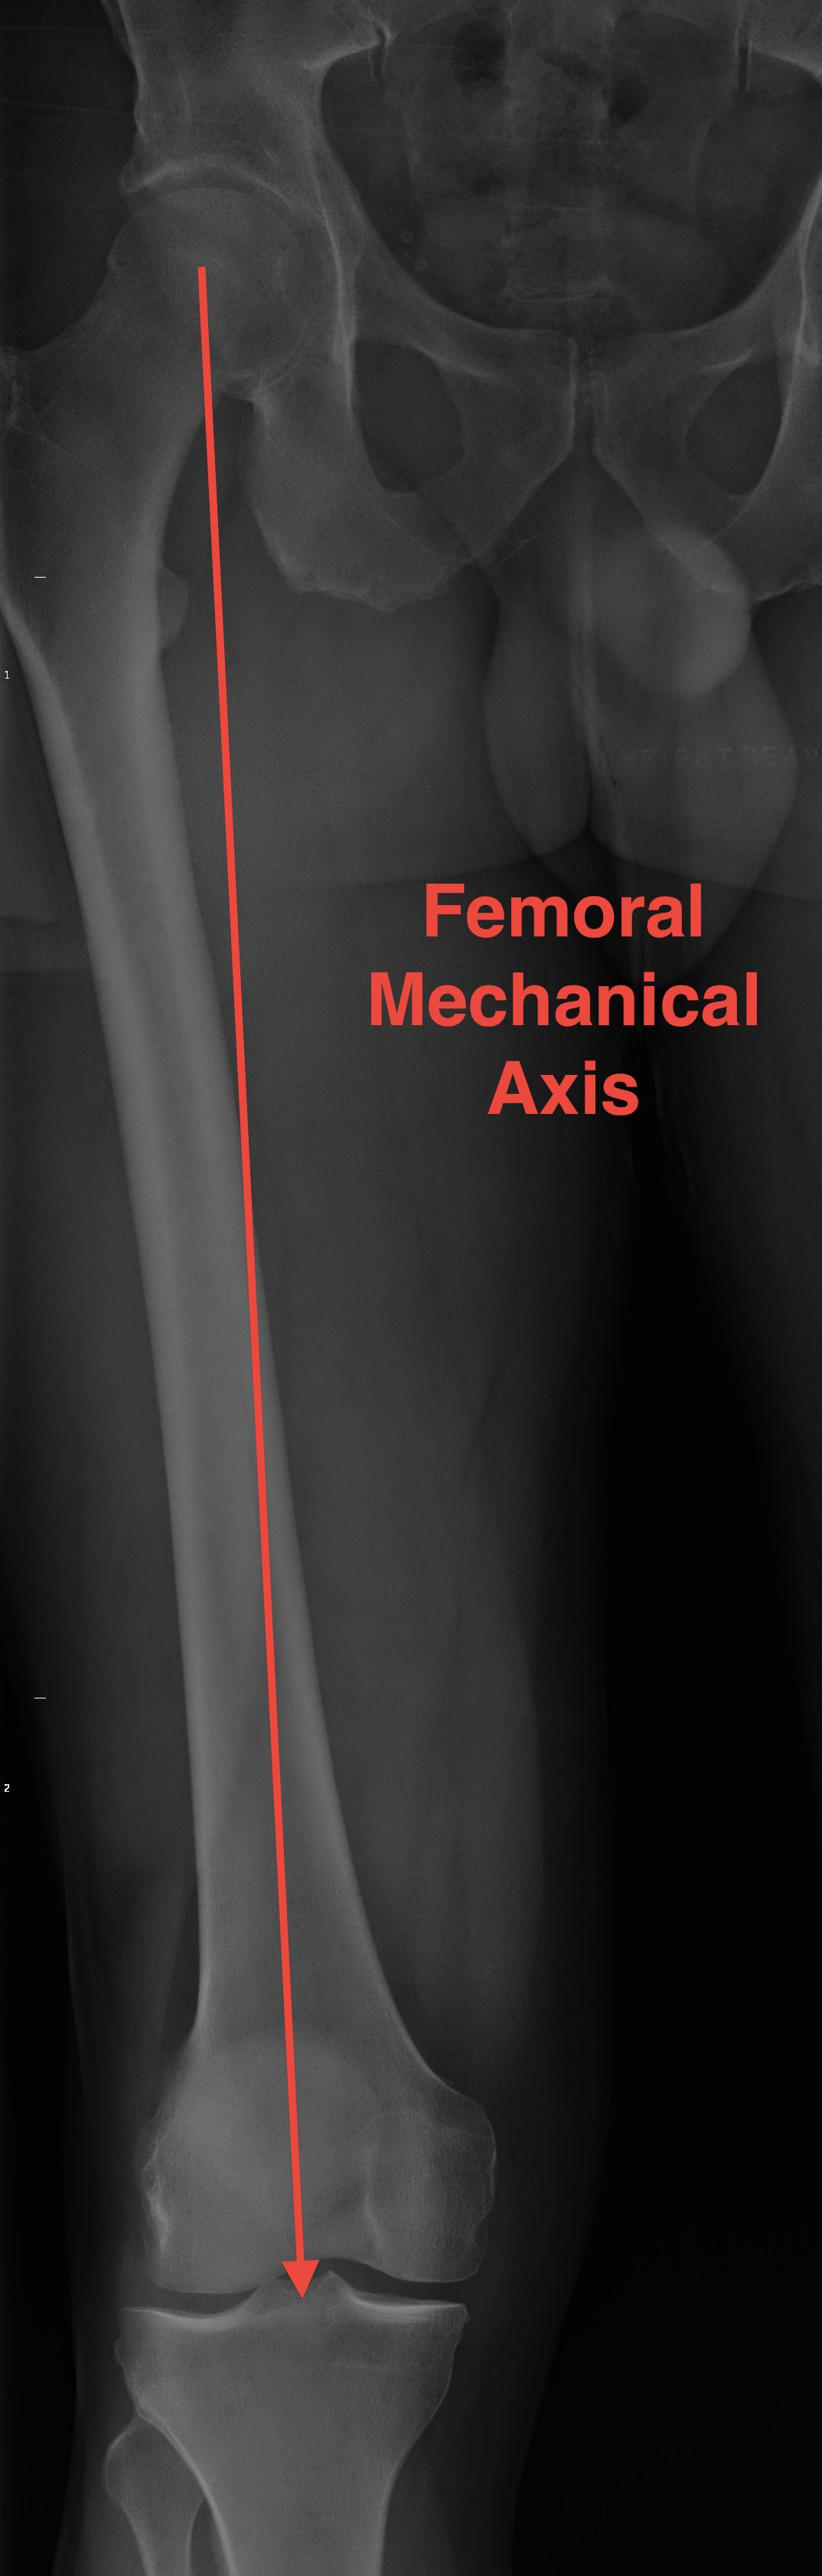 Femoral Mechanical Axis